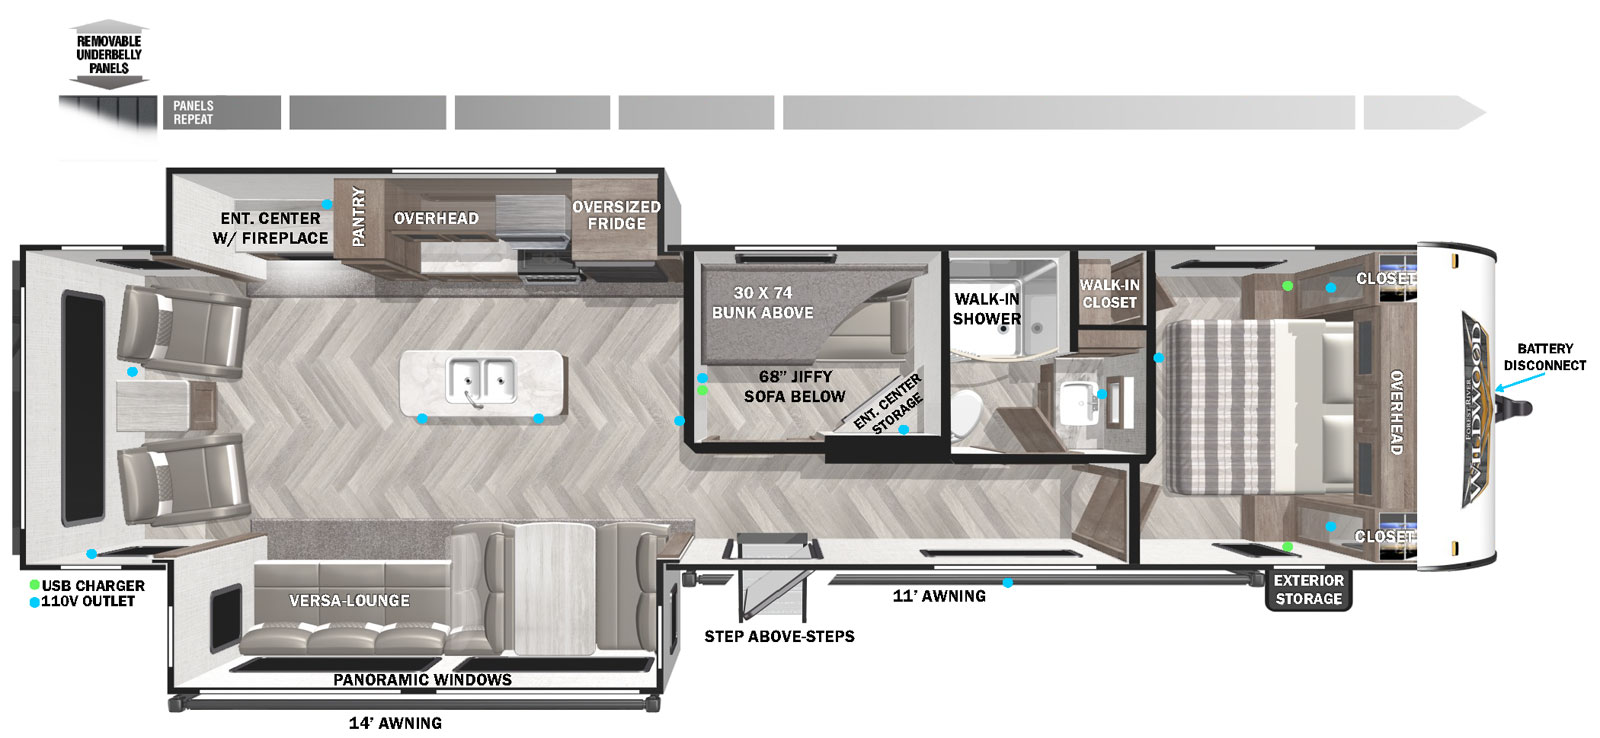 The 34MBS is a middle bunk floorplan with opposing dual slide outs in the rear of the floorplan. The outside features two electric power awnings, one that is 14 feet and the other is 11 feet. Entering one will run right into the mid-bunk that features a top bunk, jiffy sofa, and entertainment center. Just past the mid-bunk towards the front is the bathroom that features a walk-in shower, toilet, seat, and linen storage. To the back of the rv is the double slide out area. On the camp side is a slide out with a dinette and Versa-Lounge. The Versa-Lounge provides the option for an eight foot chaise lounge or traditional dinette and sofa. The opposing slide out includes the kitchen and entertainment center. The kitchen features an oven, microwave, refrigerator, and large pantry. In between the slide outs is the kitchen island with dual basin sink and storage below. The entertainment center is across from the Versa-Lounge and it features an electric fireplace, soundbar, and TV back prepped to mount a TV. In the very rear of the floorplan are two recliners. In the very front of the floorplan is the bedroom that features a slide out that has an east to west style custom king bed. The bedroom has features underbed storage, overhead storage, walk-in closet, and closets next to the front of the bed with CPAP storage.